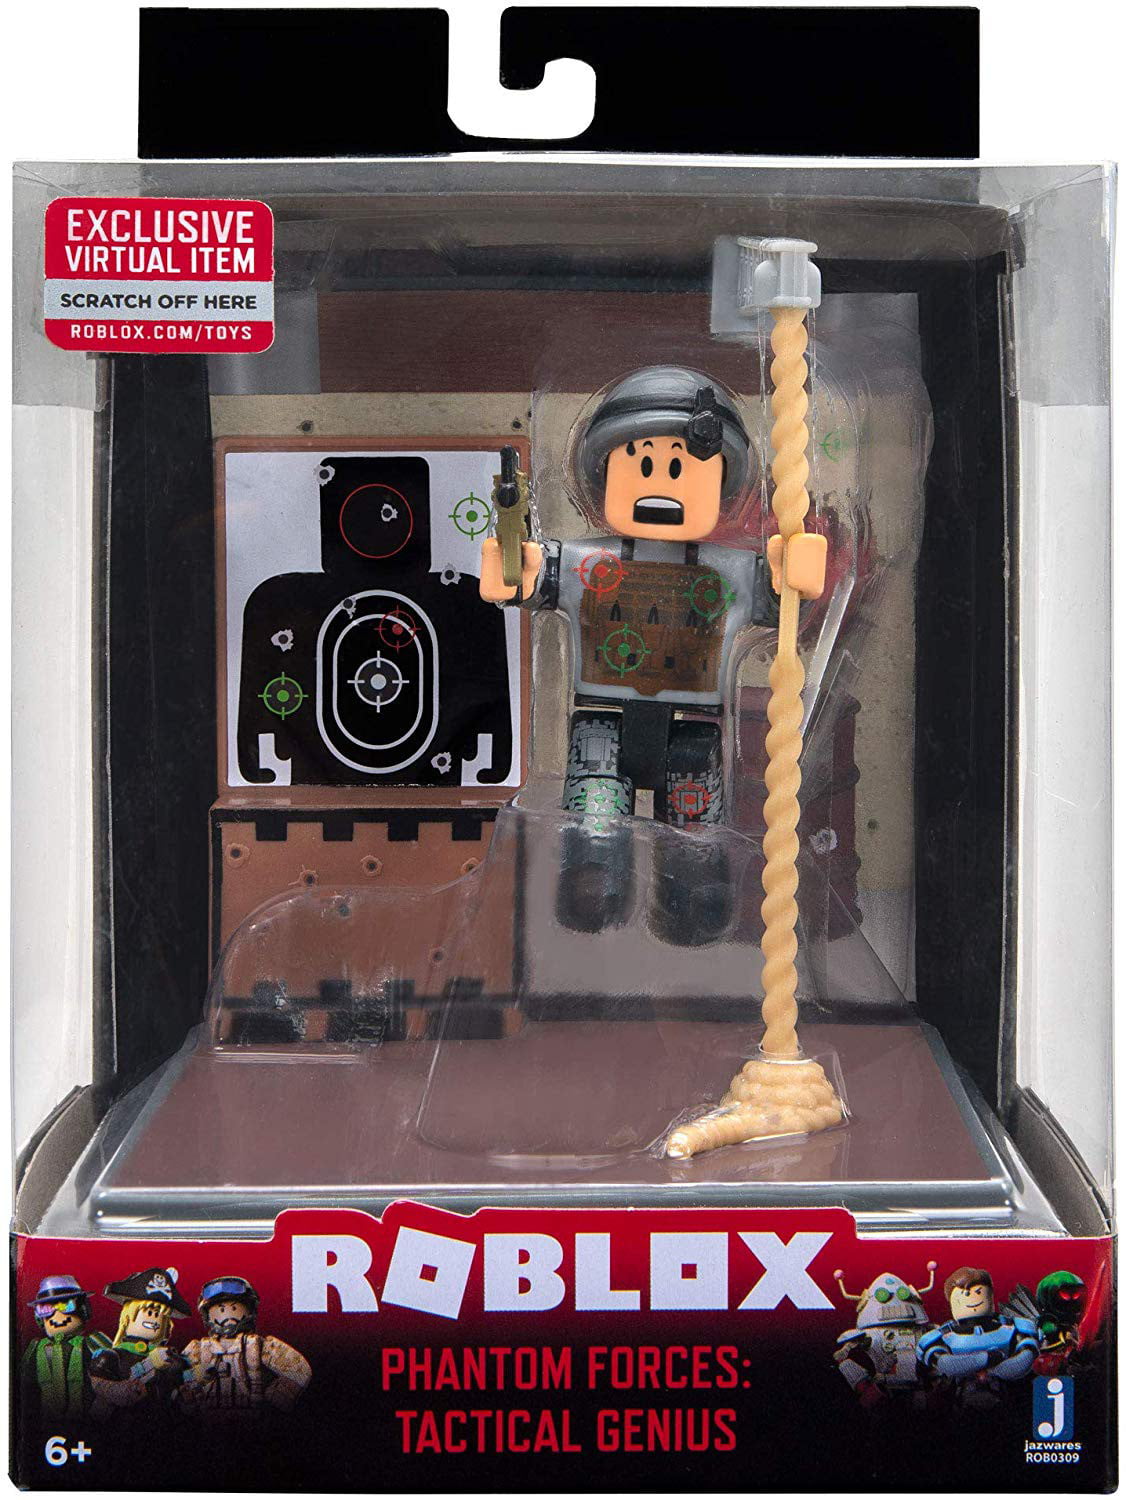 1,000+ affordable roblox For Sale, Gaming Accessories